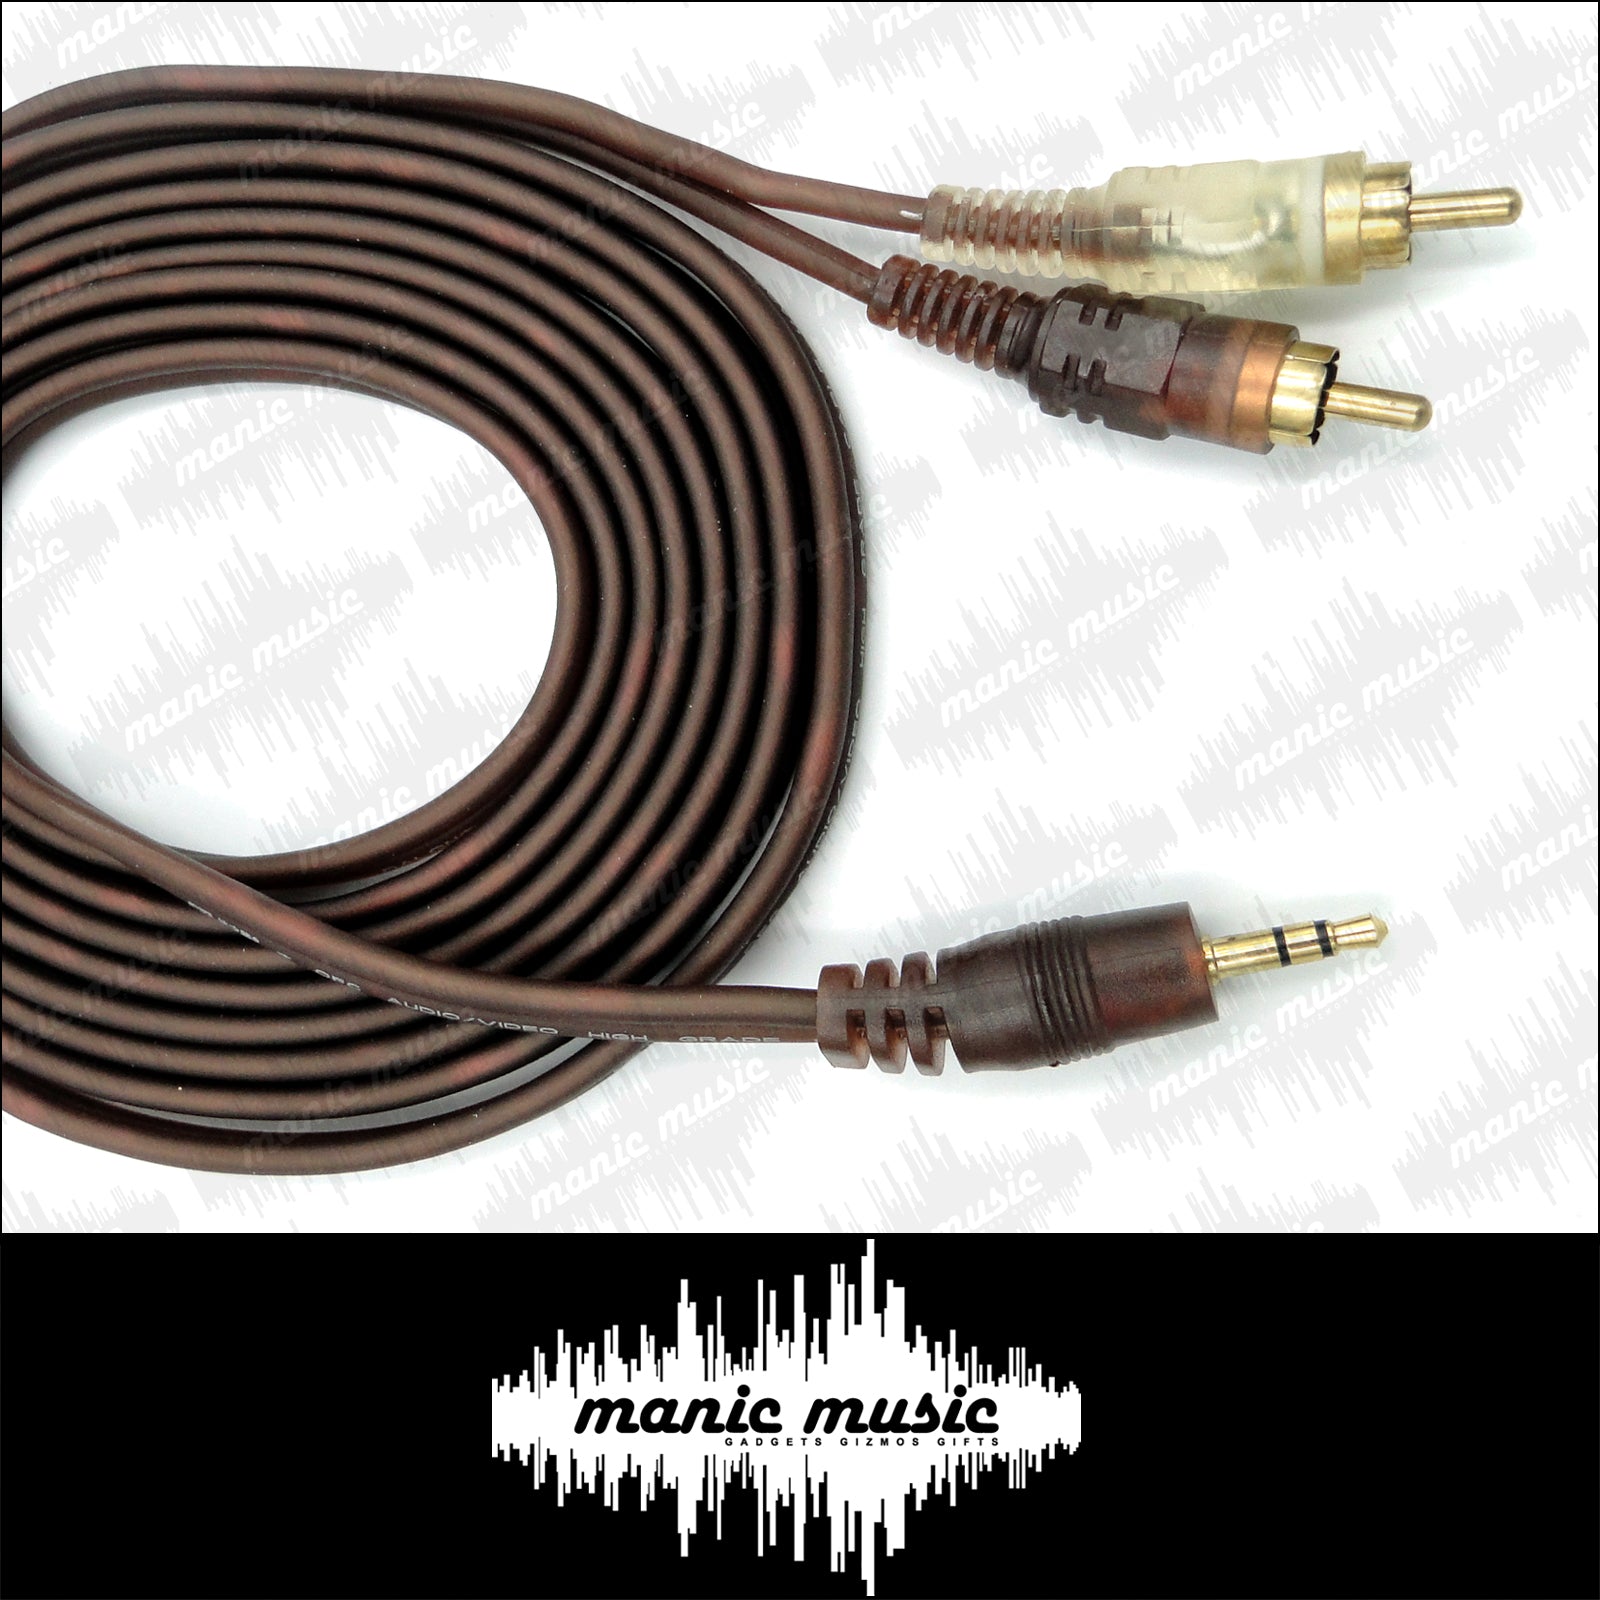 Mini 3.5mm AV 1 into 2 Audio Stereo Aux Cord 2 RCA to 3.5mm Male 3.5 Jack  RCA Aux Cable For Speaker Wire For Car/PC/TV